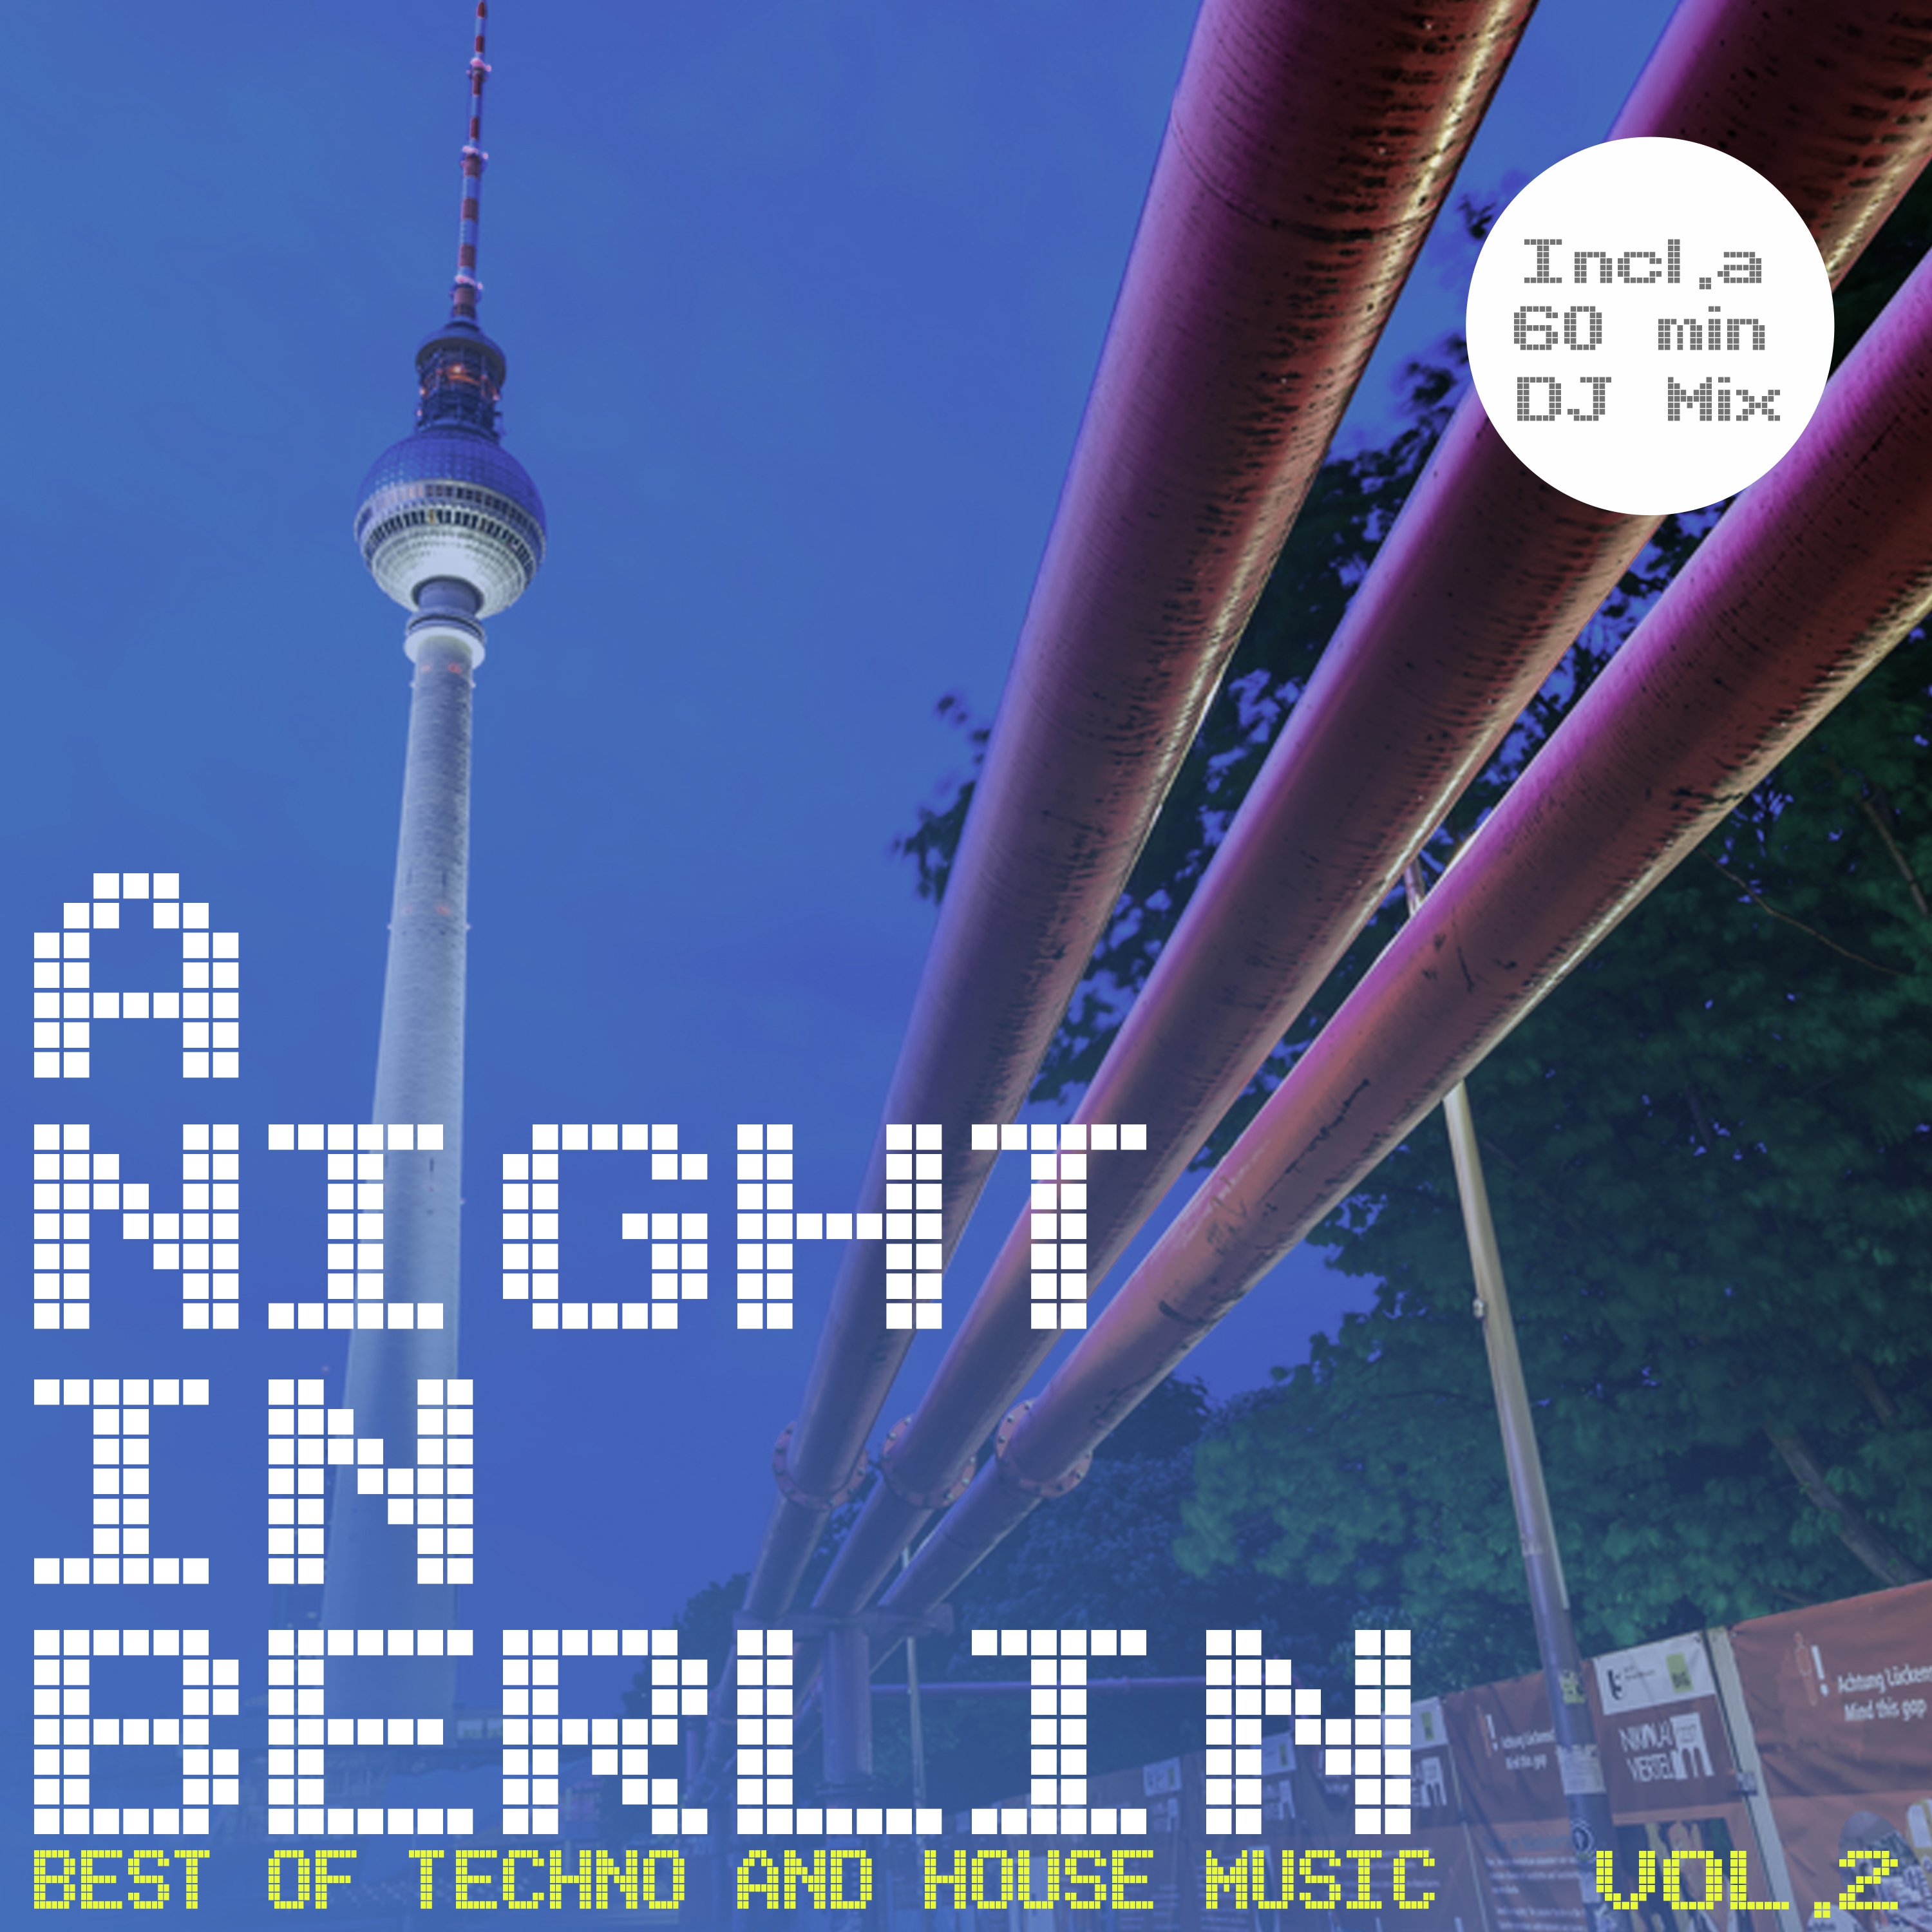 A Night in Berlin, Vol. 2 - Best of Techno and House Music